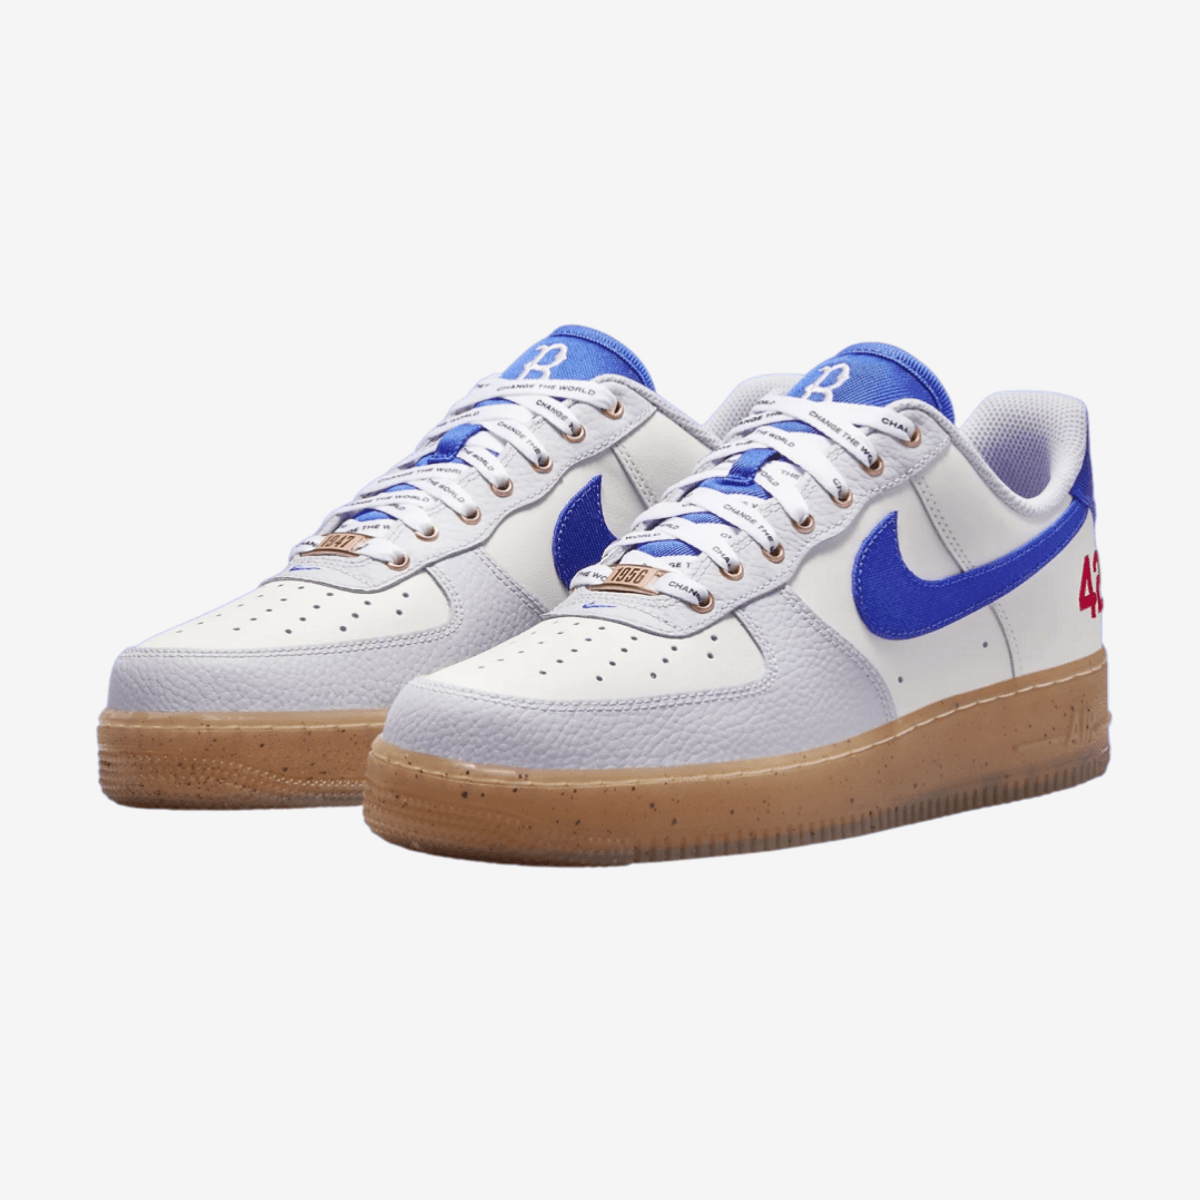 Nike Pays Homage To The Great Jackie Robinson With An Air Force 1